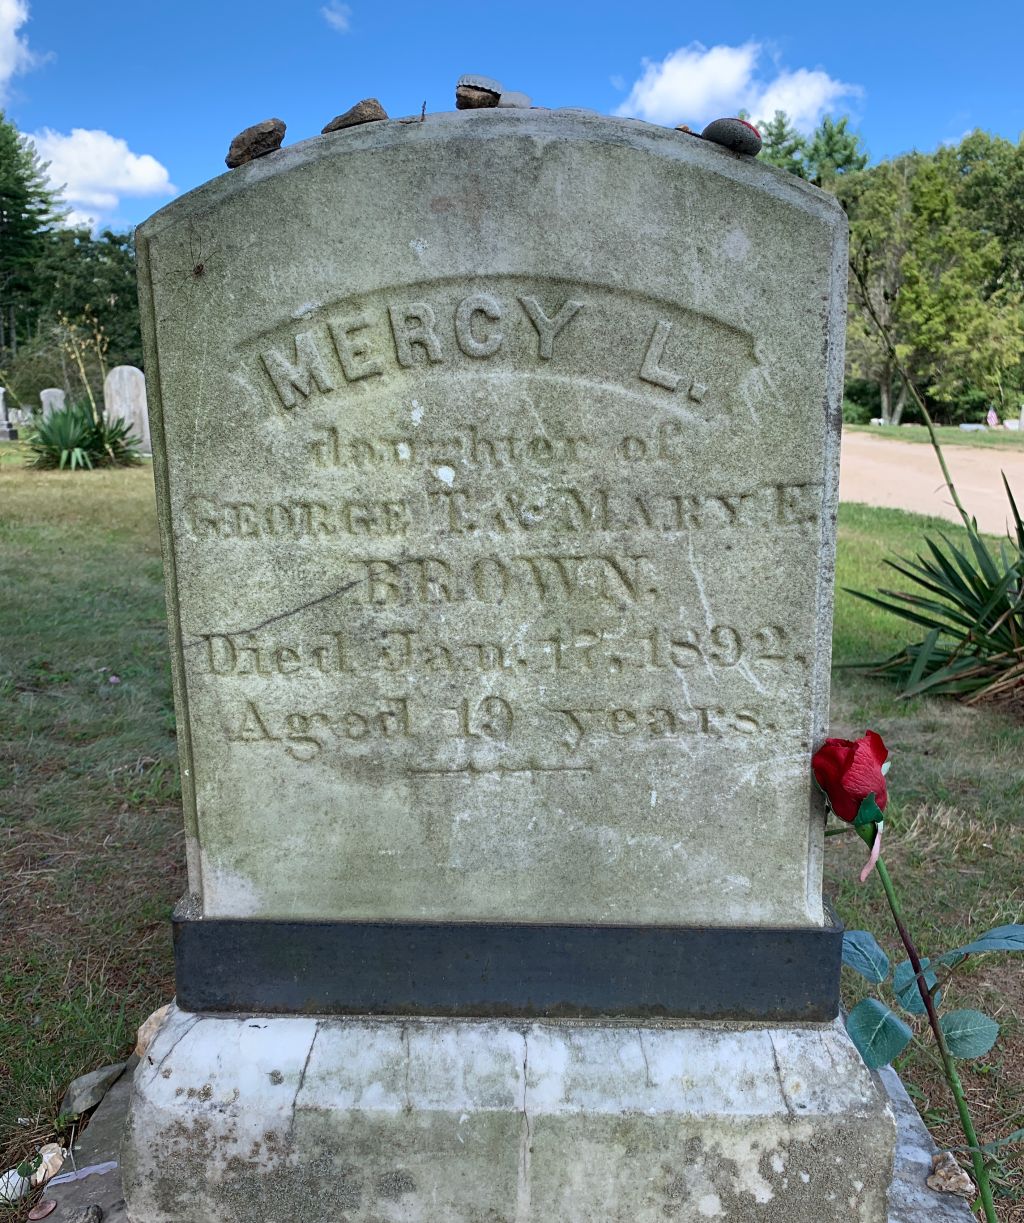 The poor teenager Mercy Brown was exhumed by her father after her mother and sister also died from tuberculosis. Nancy Lou.